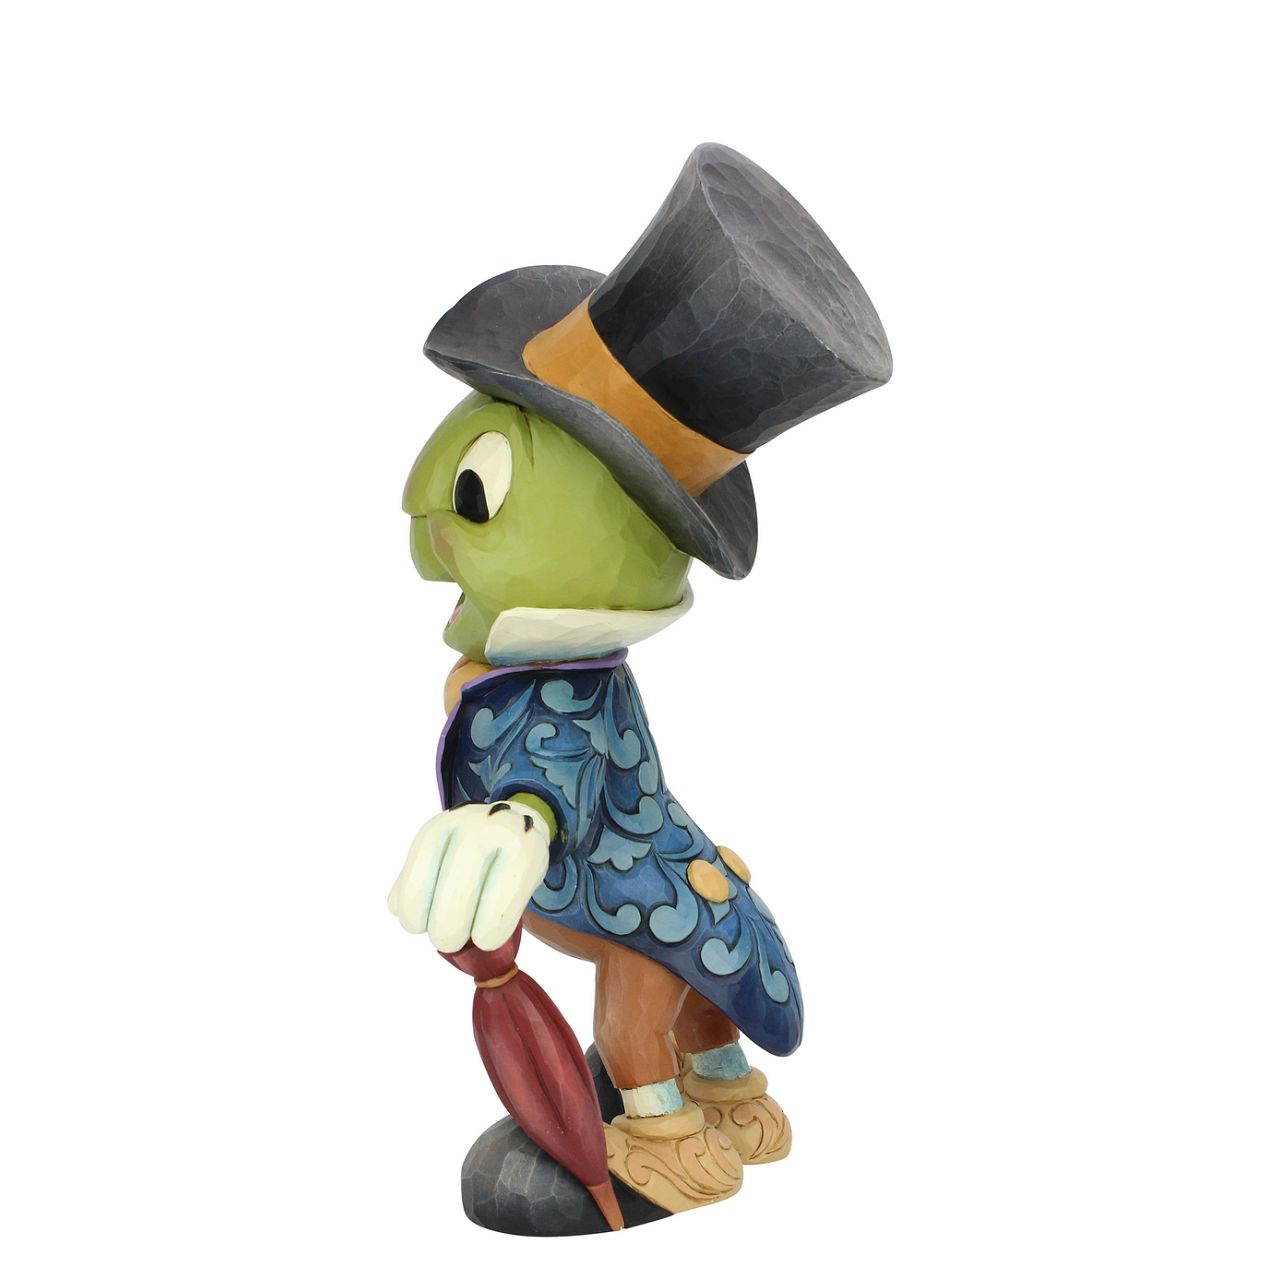 Jim Shore Cricket's the Name. Jiminy Cricket Statement Figurine  Jiminy Cricket, Pinocchio's conscience, smiles brightly in this Jim Shore figurine. Dressed in his classic suit, ascot, and top hat, Disney's unofficial mascot holds his umbrella ready to issue advice to anyone in moral dilemma.